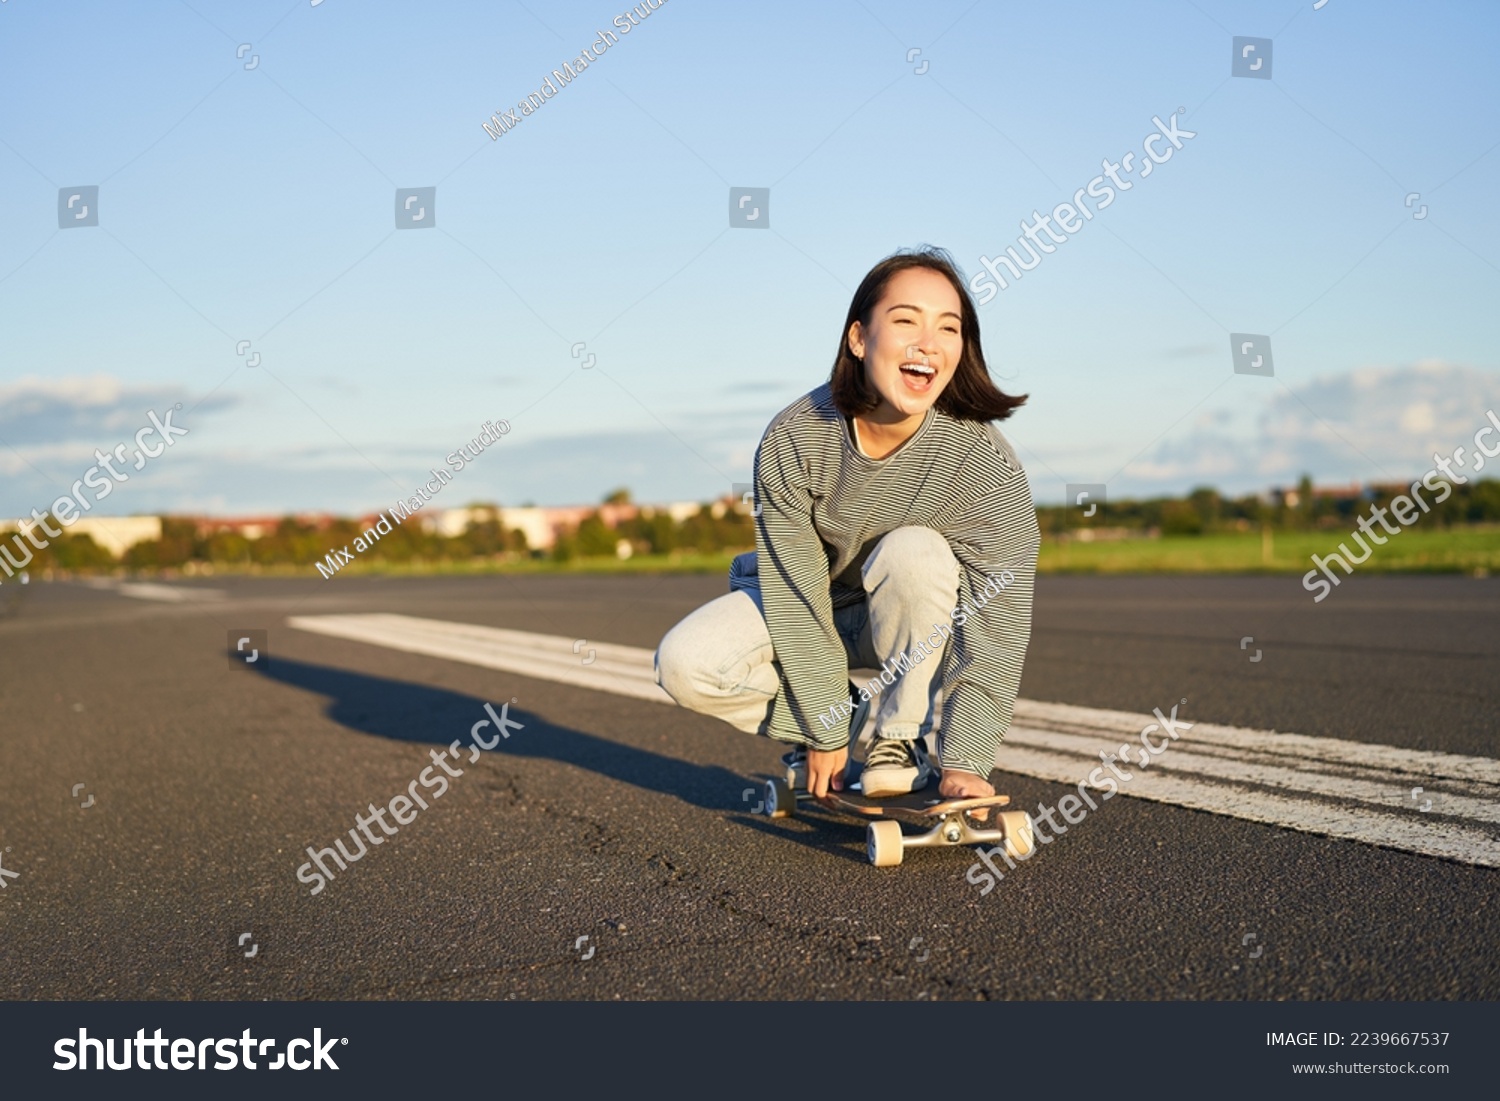 Freedom and happiness. Happy asian girl riding her longboard on an empty sunny road, laughing and smiling, skateboarding. #2239667537